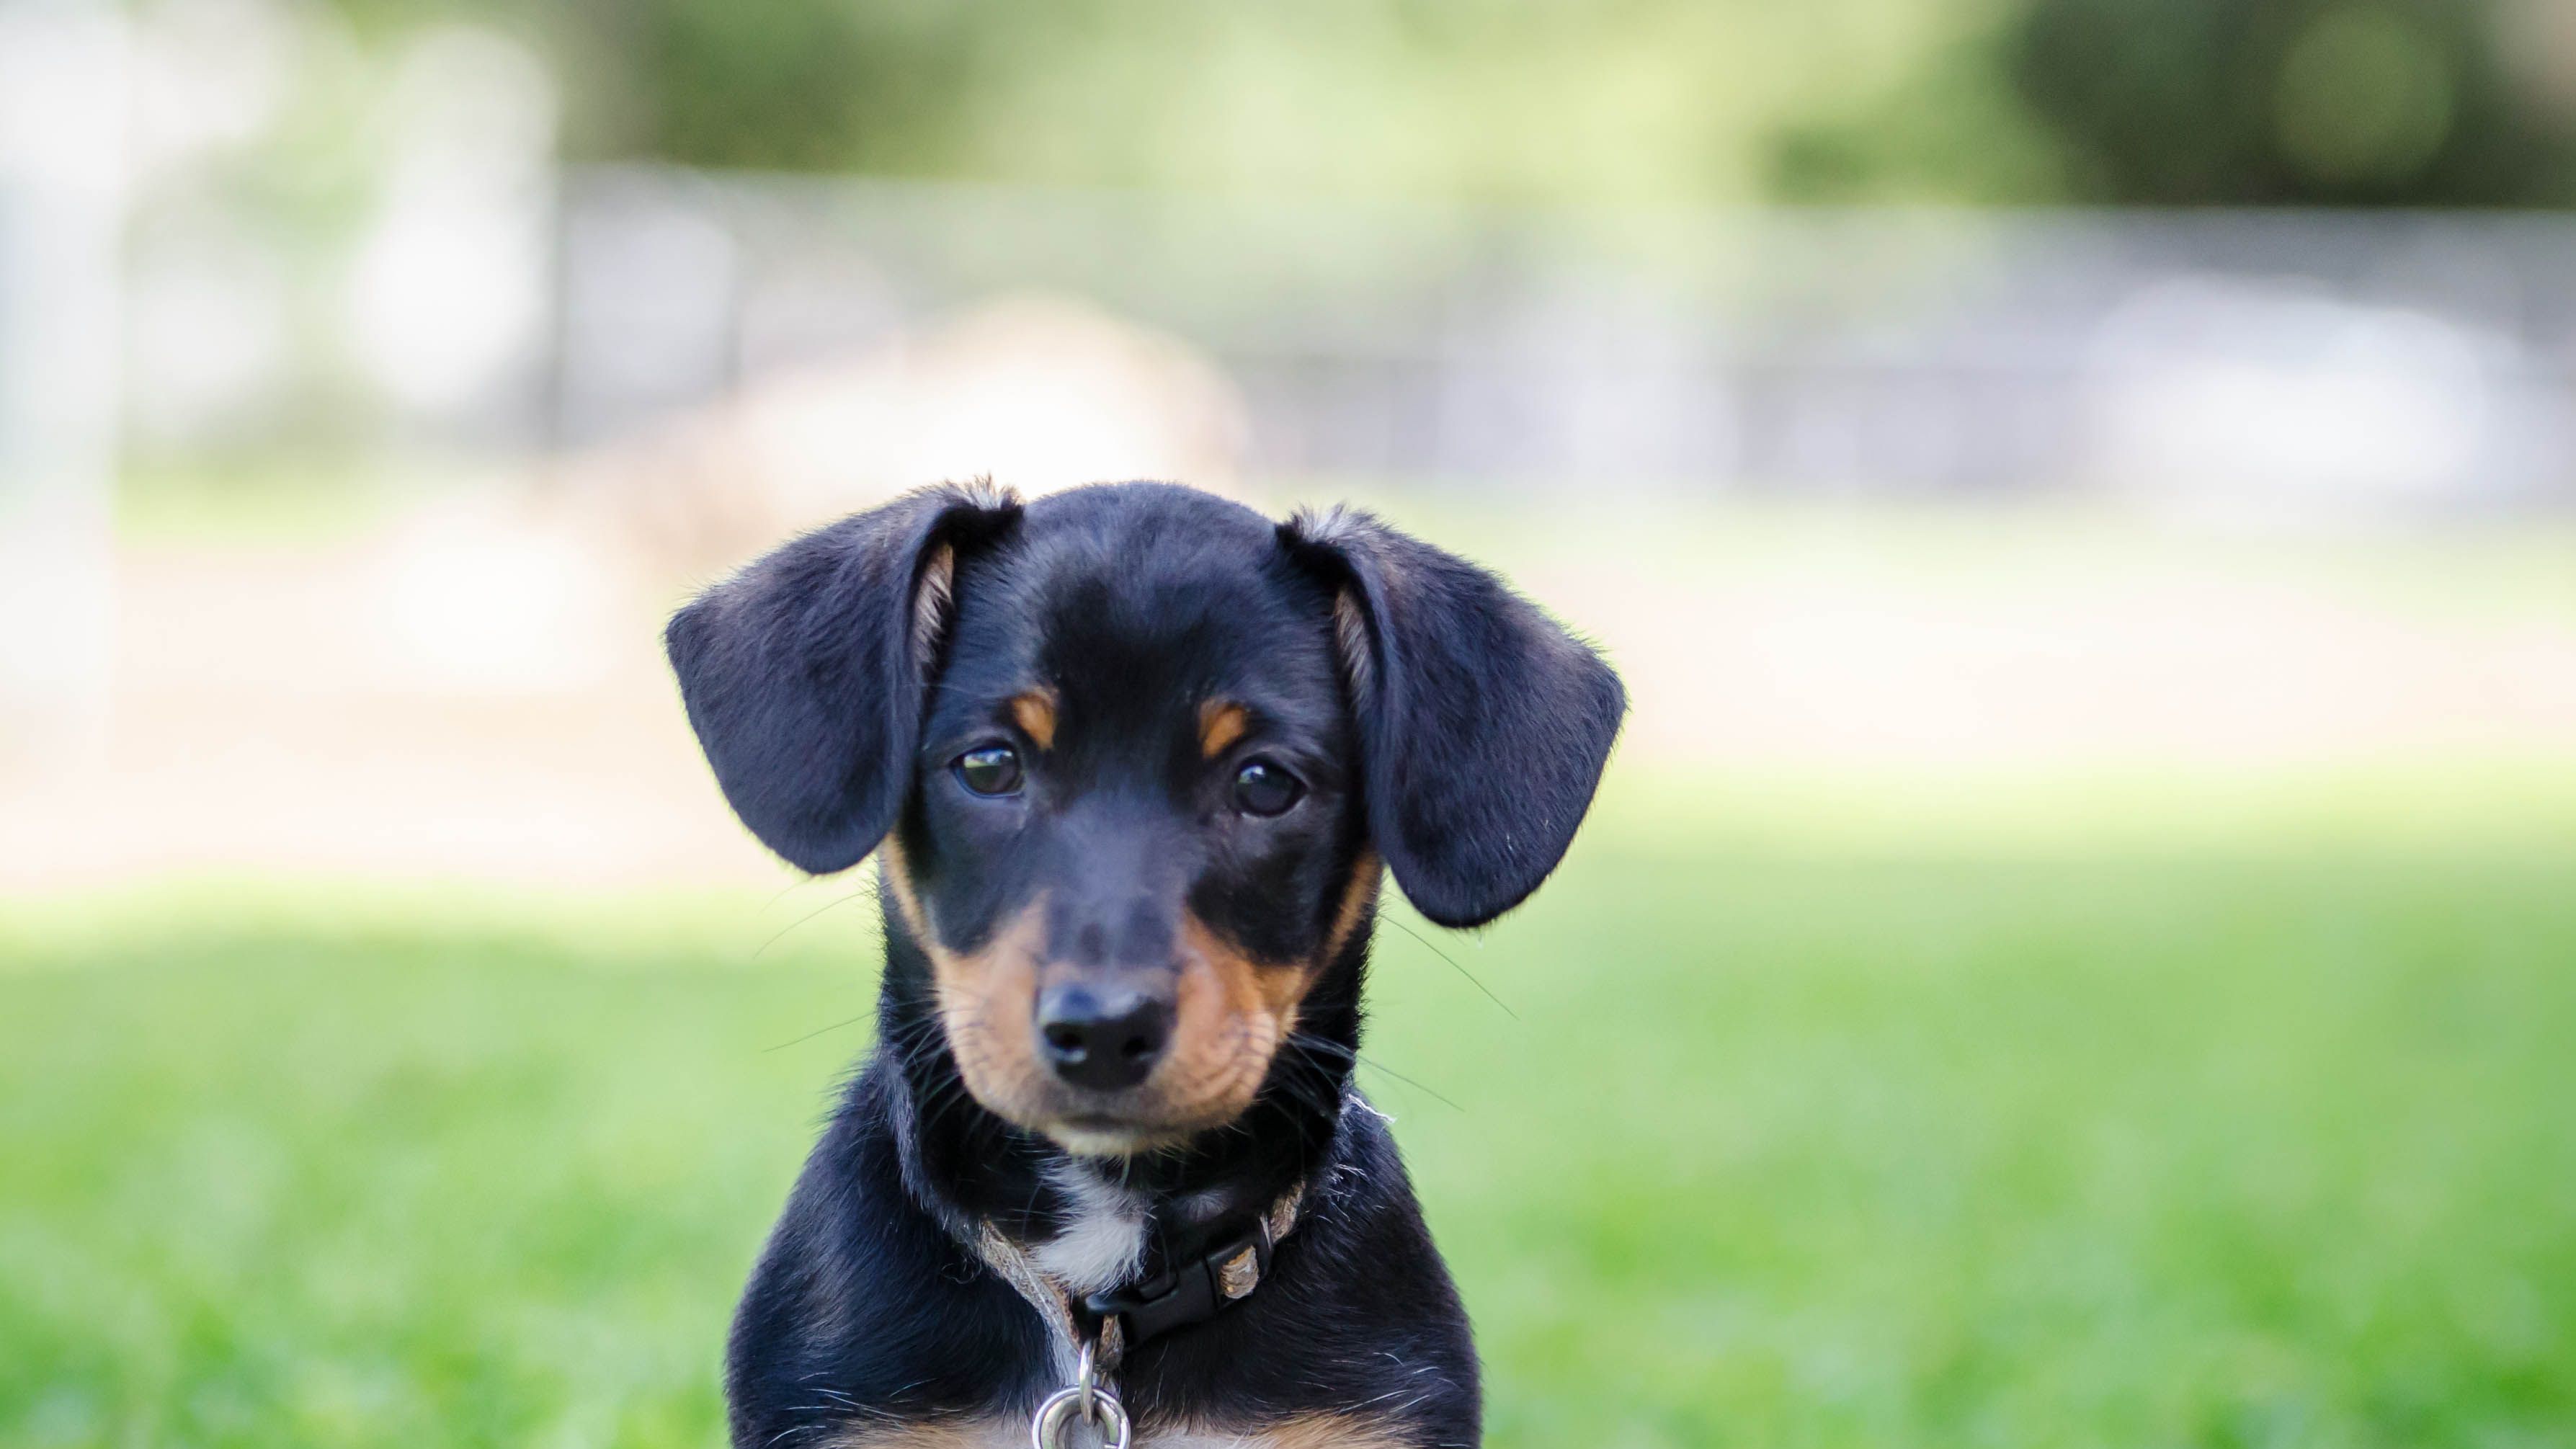 are mixed breed dogs better than purebred